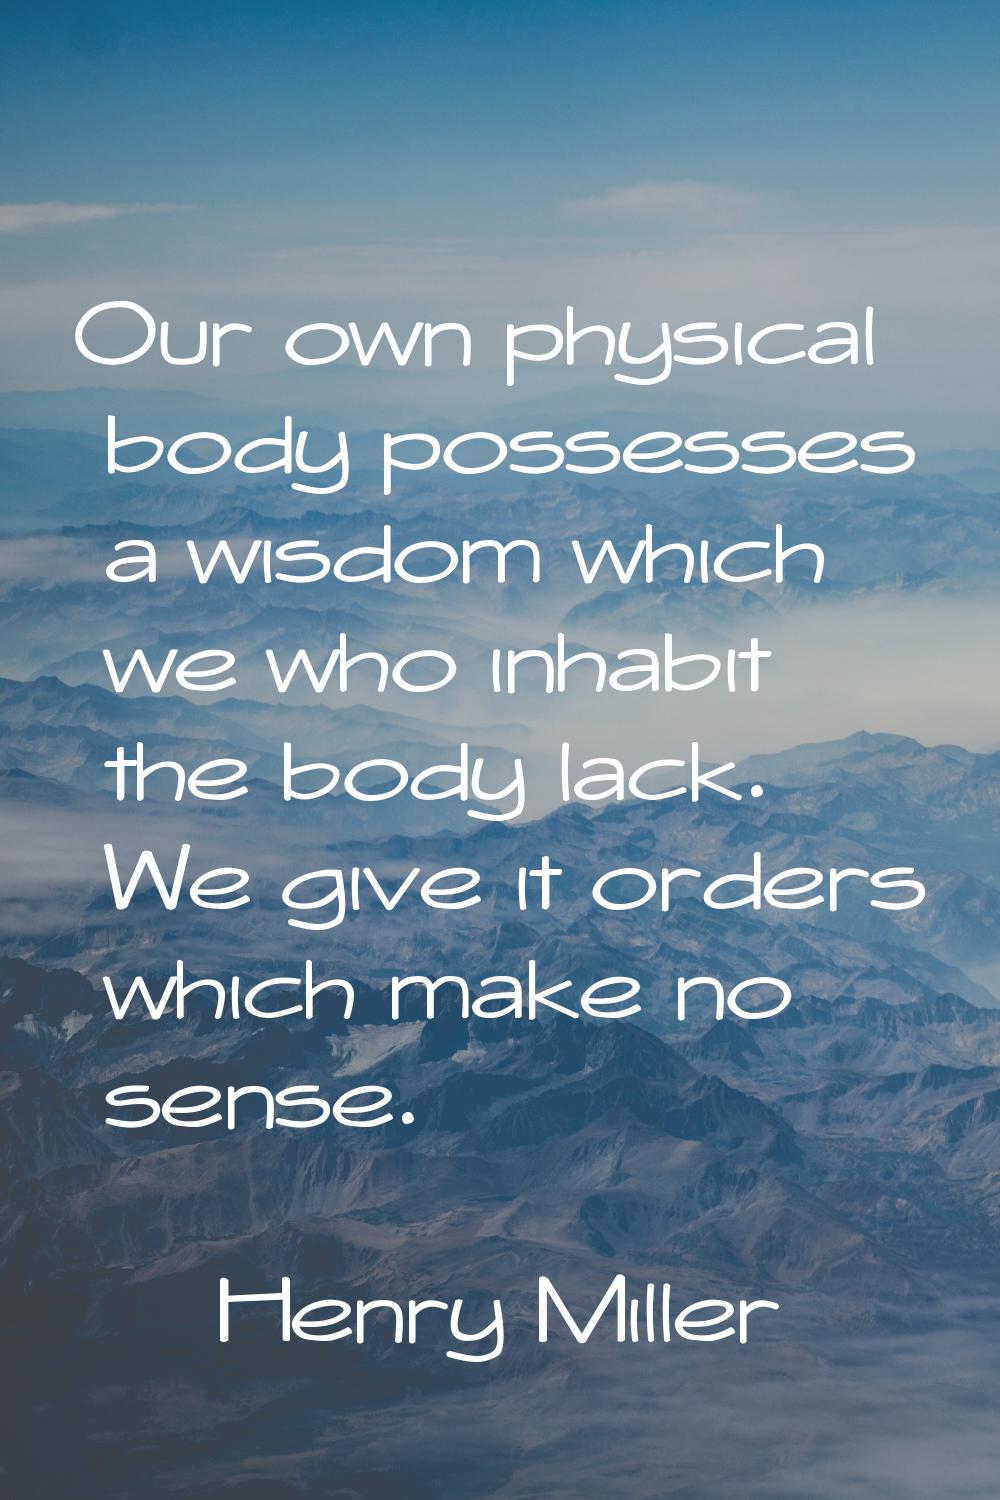 Our own physical body possesses a wisdom which we who inhabit the body lack. We give it orders whic